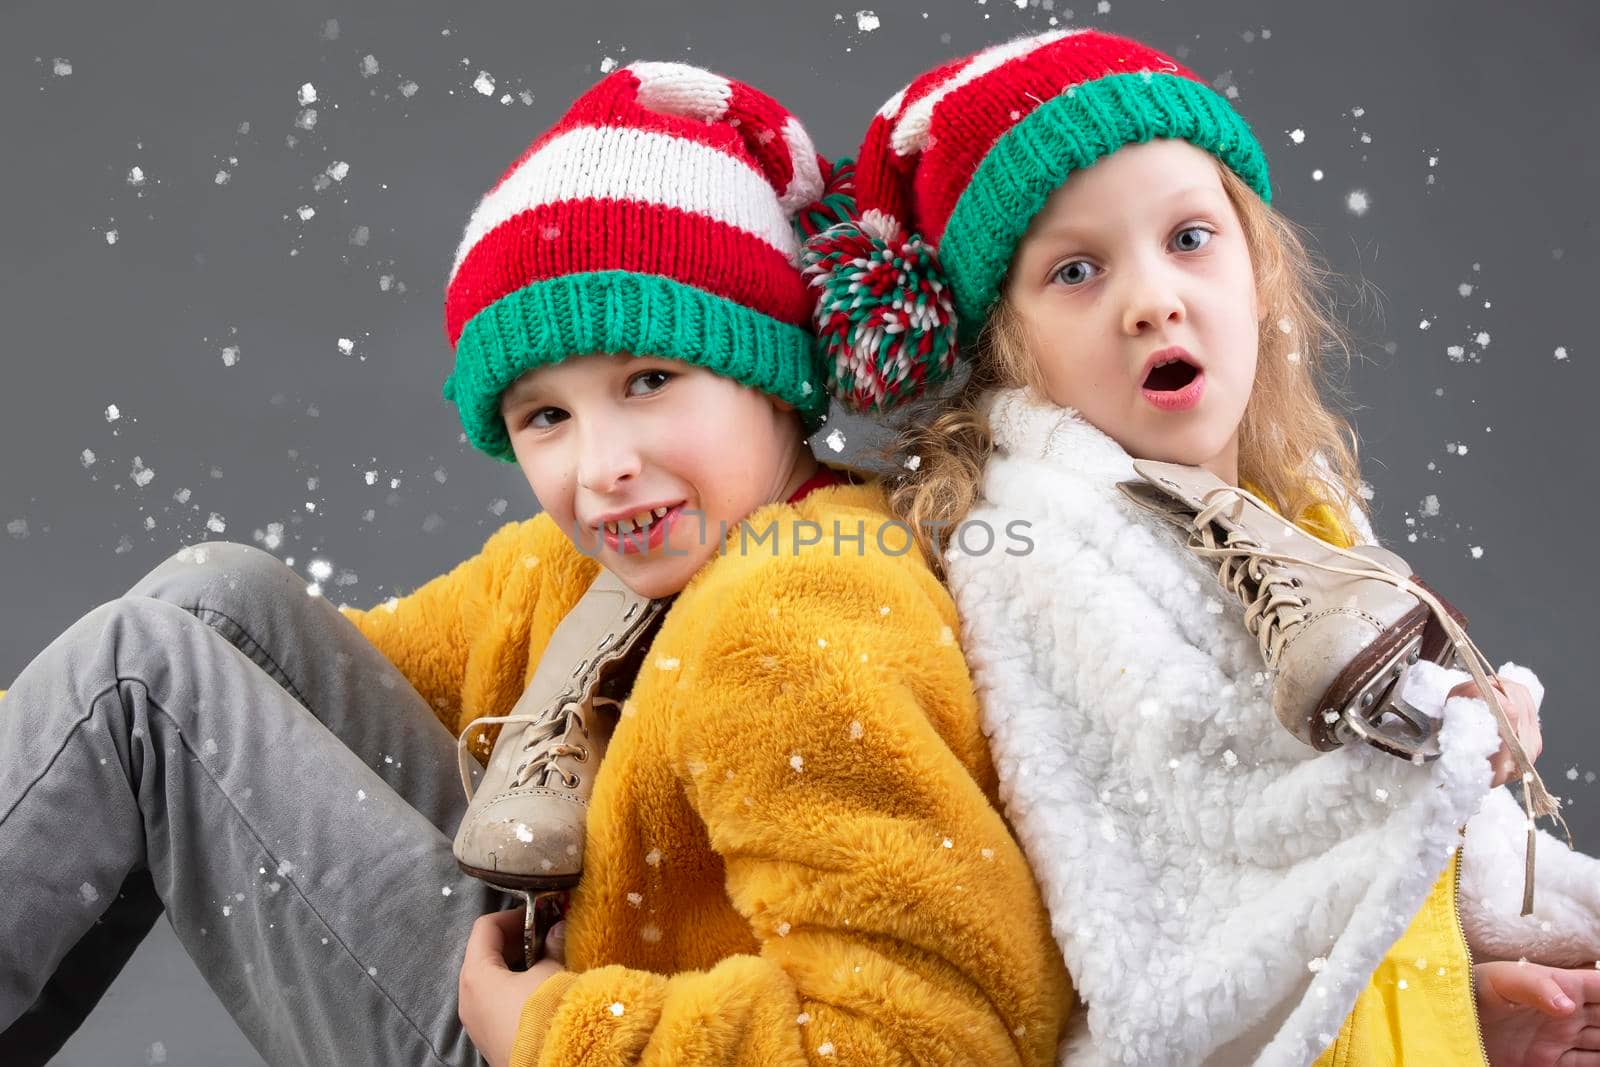 Funny little girl and boy in knitted Christmas hats and vintage ice skates sit with their backs to each other and look at the falling snow on a gray background. Happy Christmas kids.